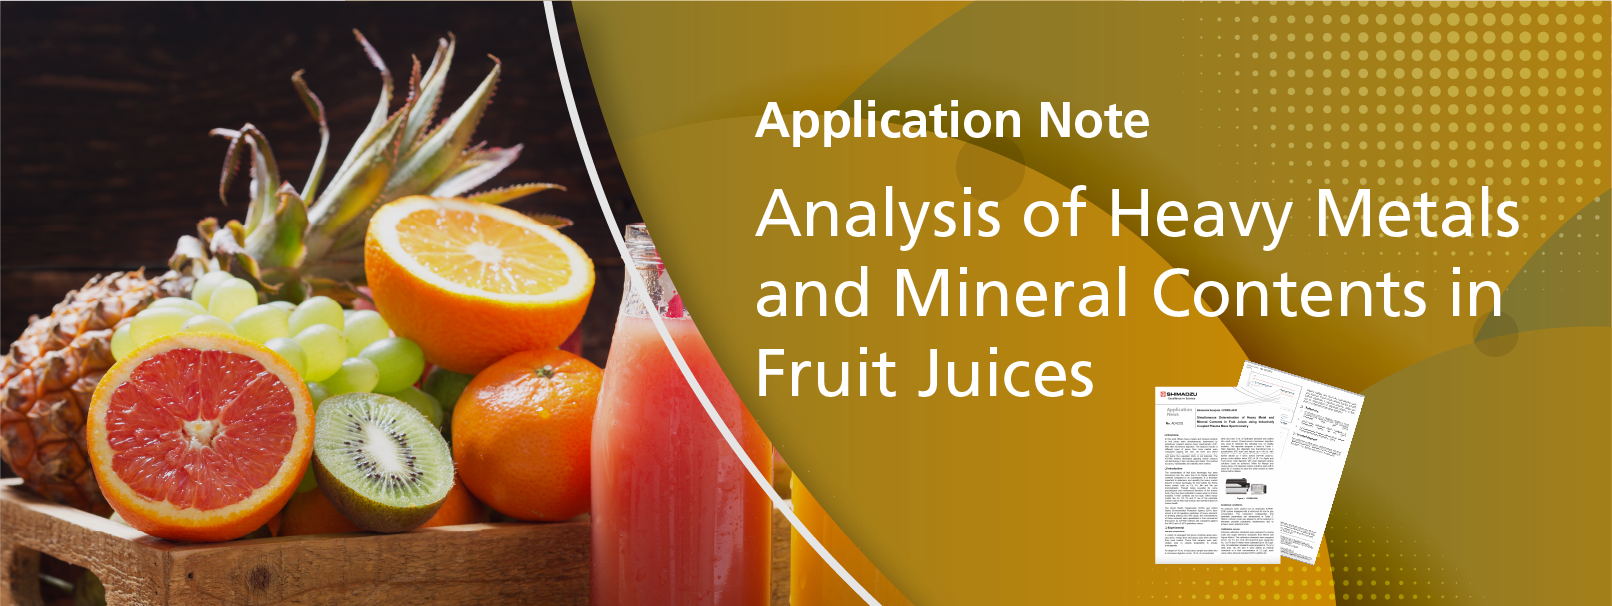 Analysis of Heavy Metals and Mineral Contents in Fruit Juices